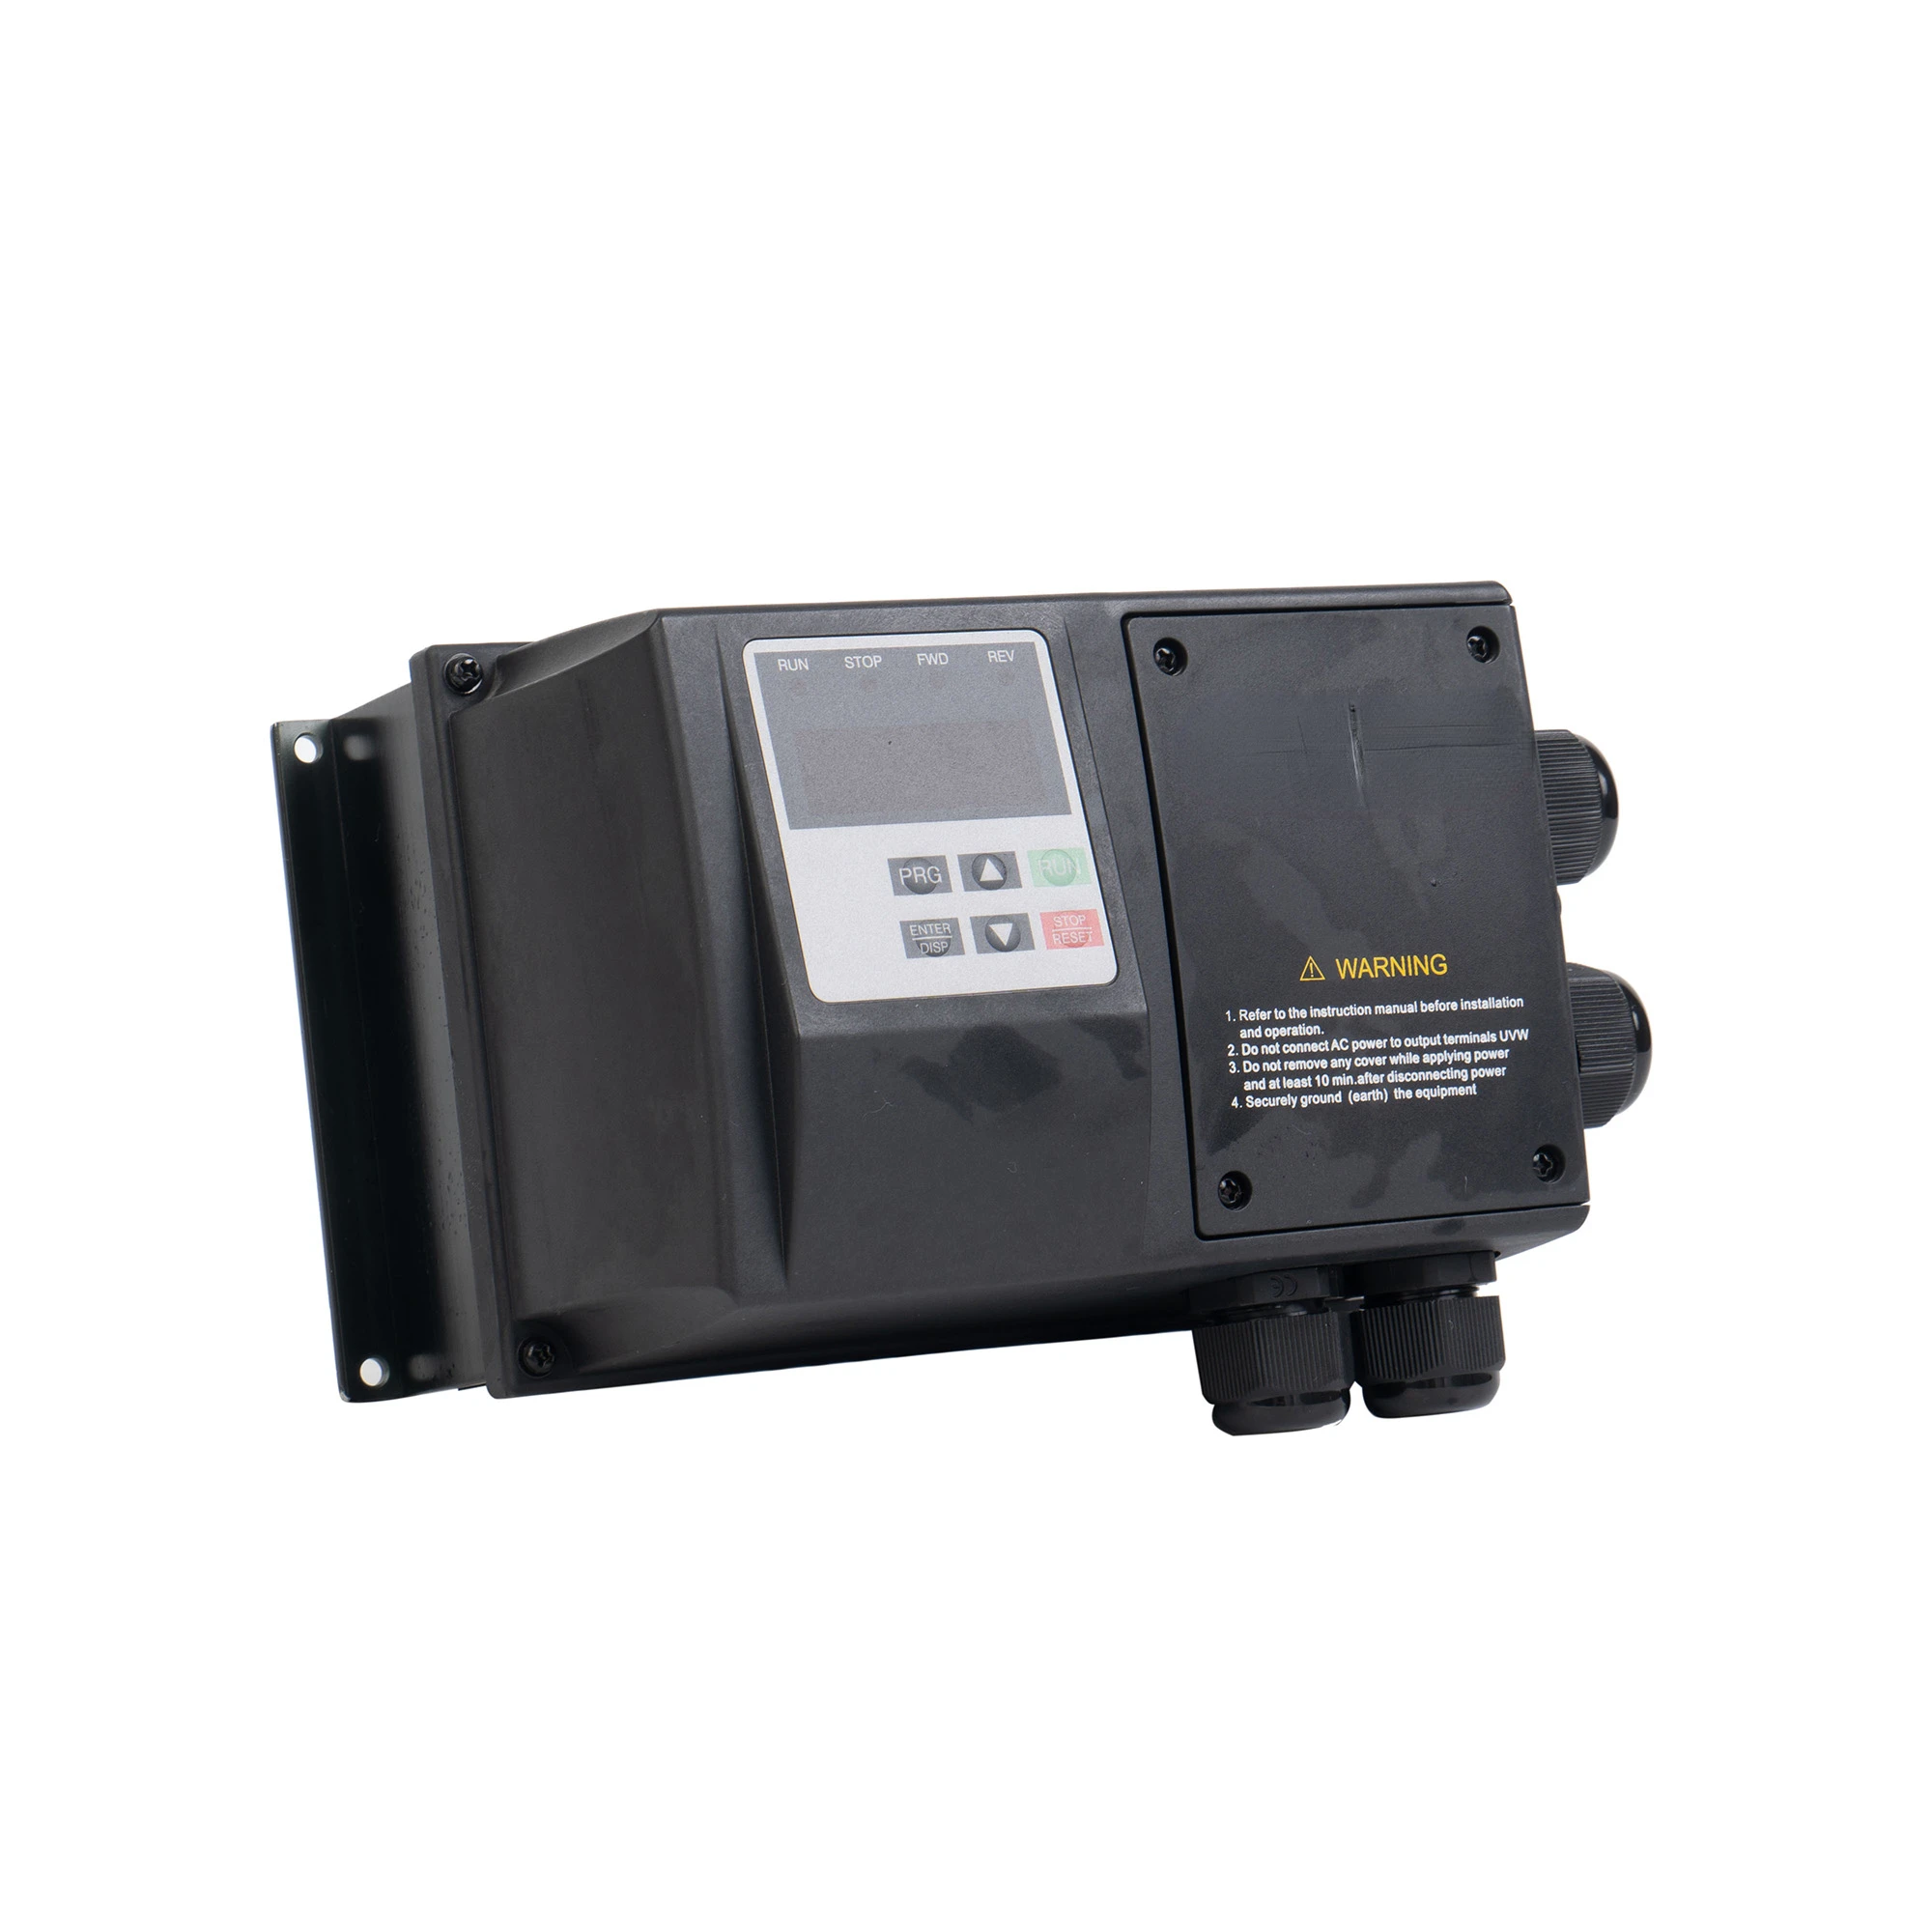 

AC Drive Machtric Frequency inverter / frequency converter